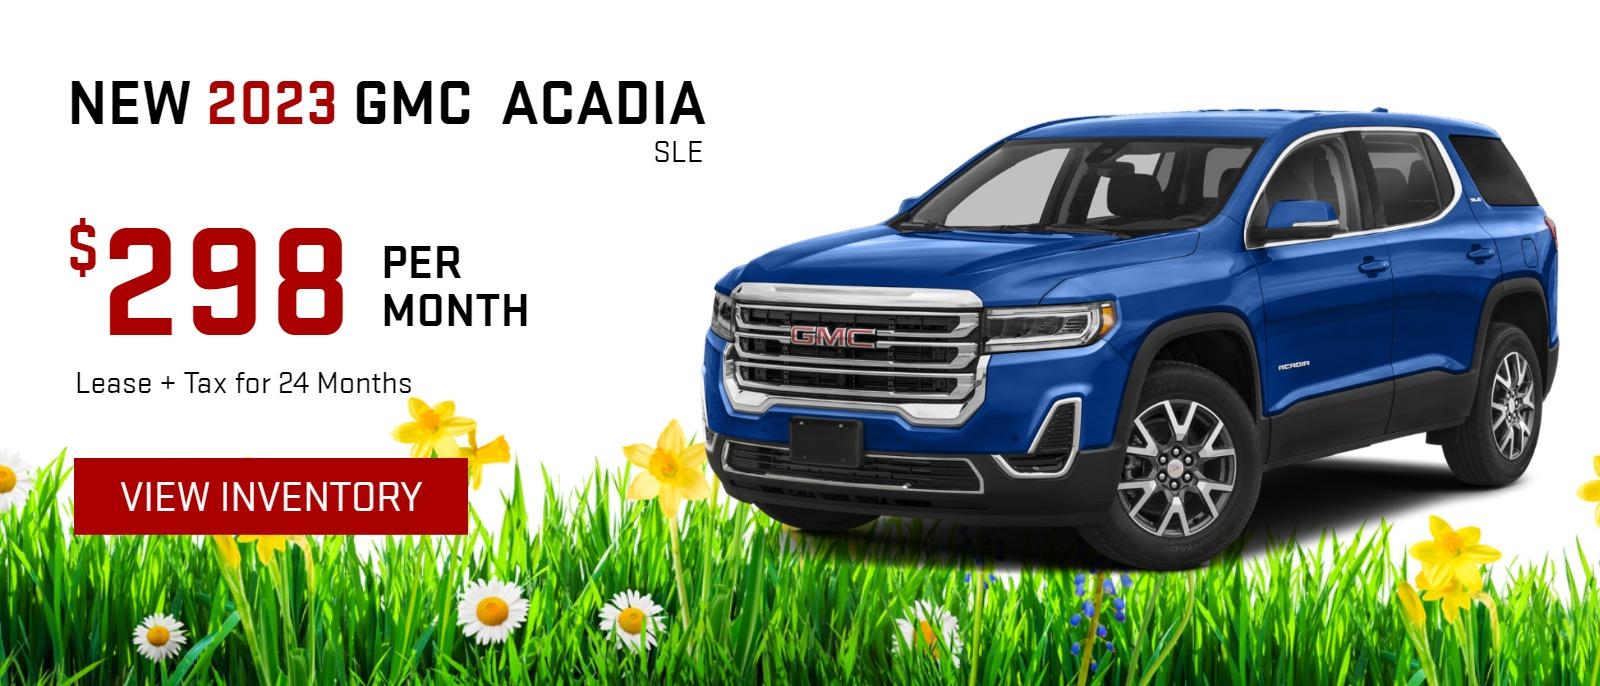 New 2023 GMC Acadia SLE
$298/mo.* Lease + Tax for 24 Months